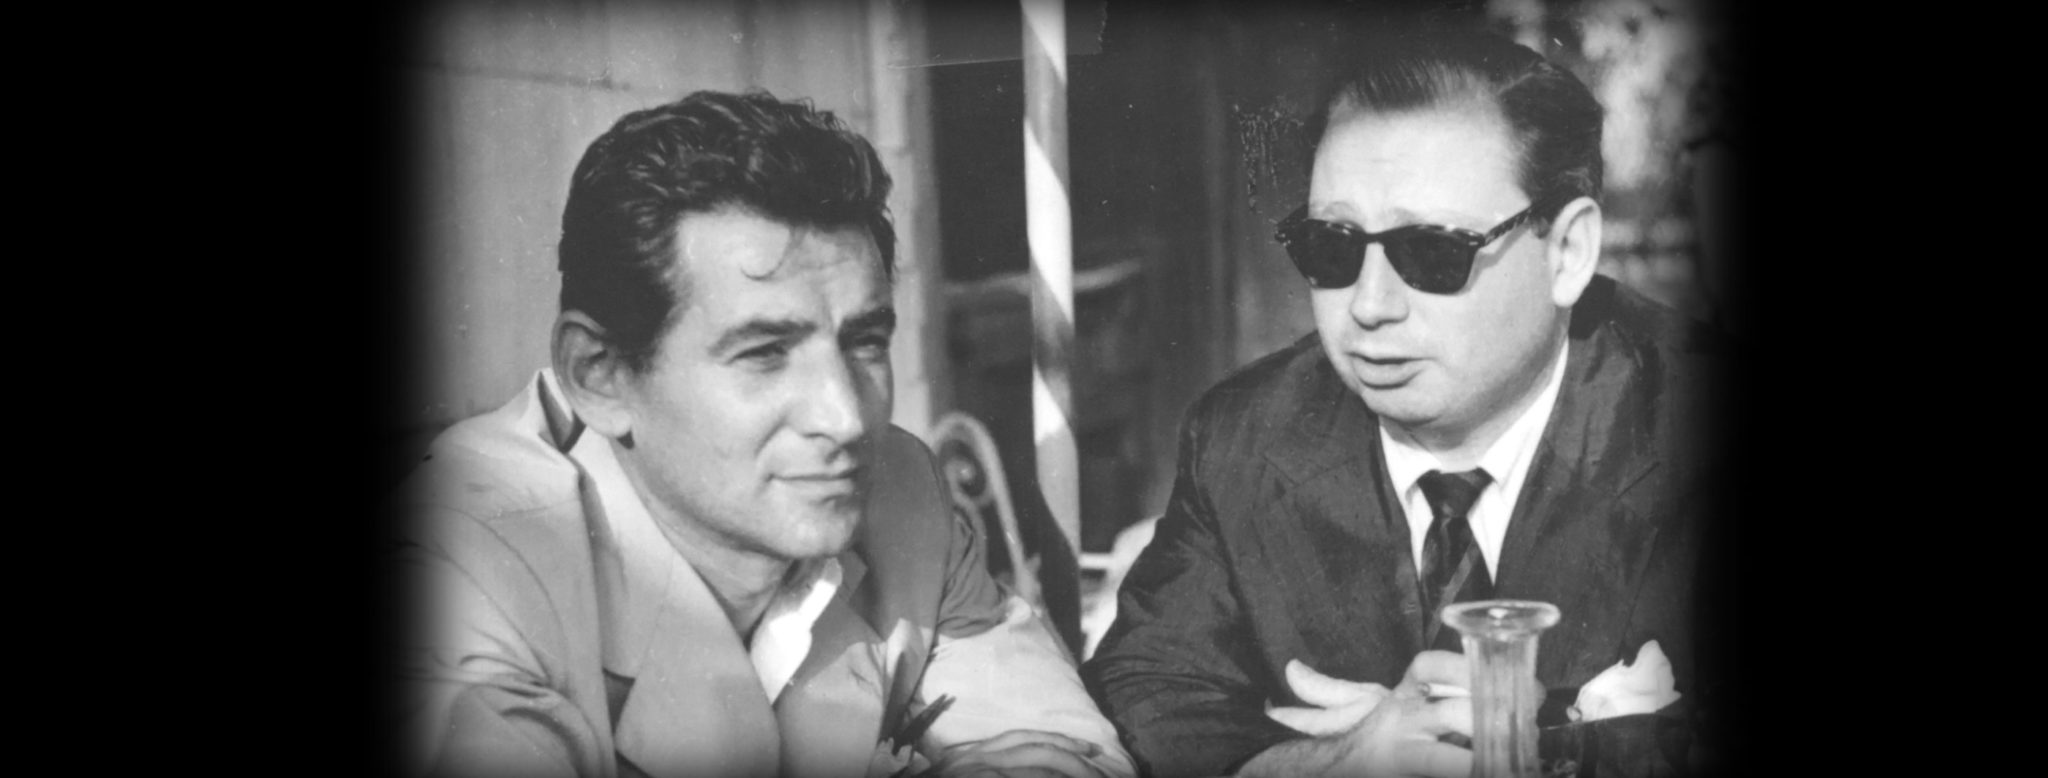 Leonard Bernstein and Isaac Stern in Venice, 1954. (Credit: Library of Congress Music Division)